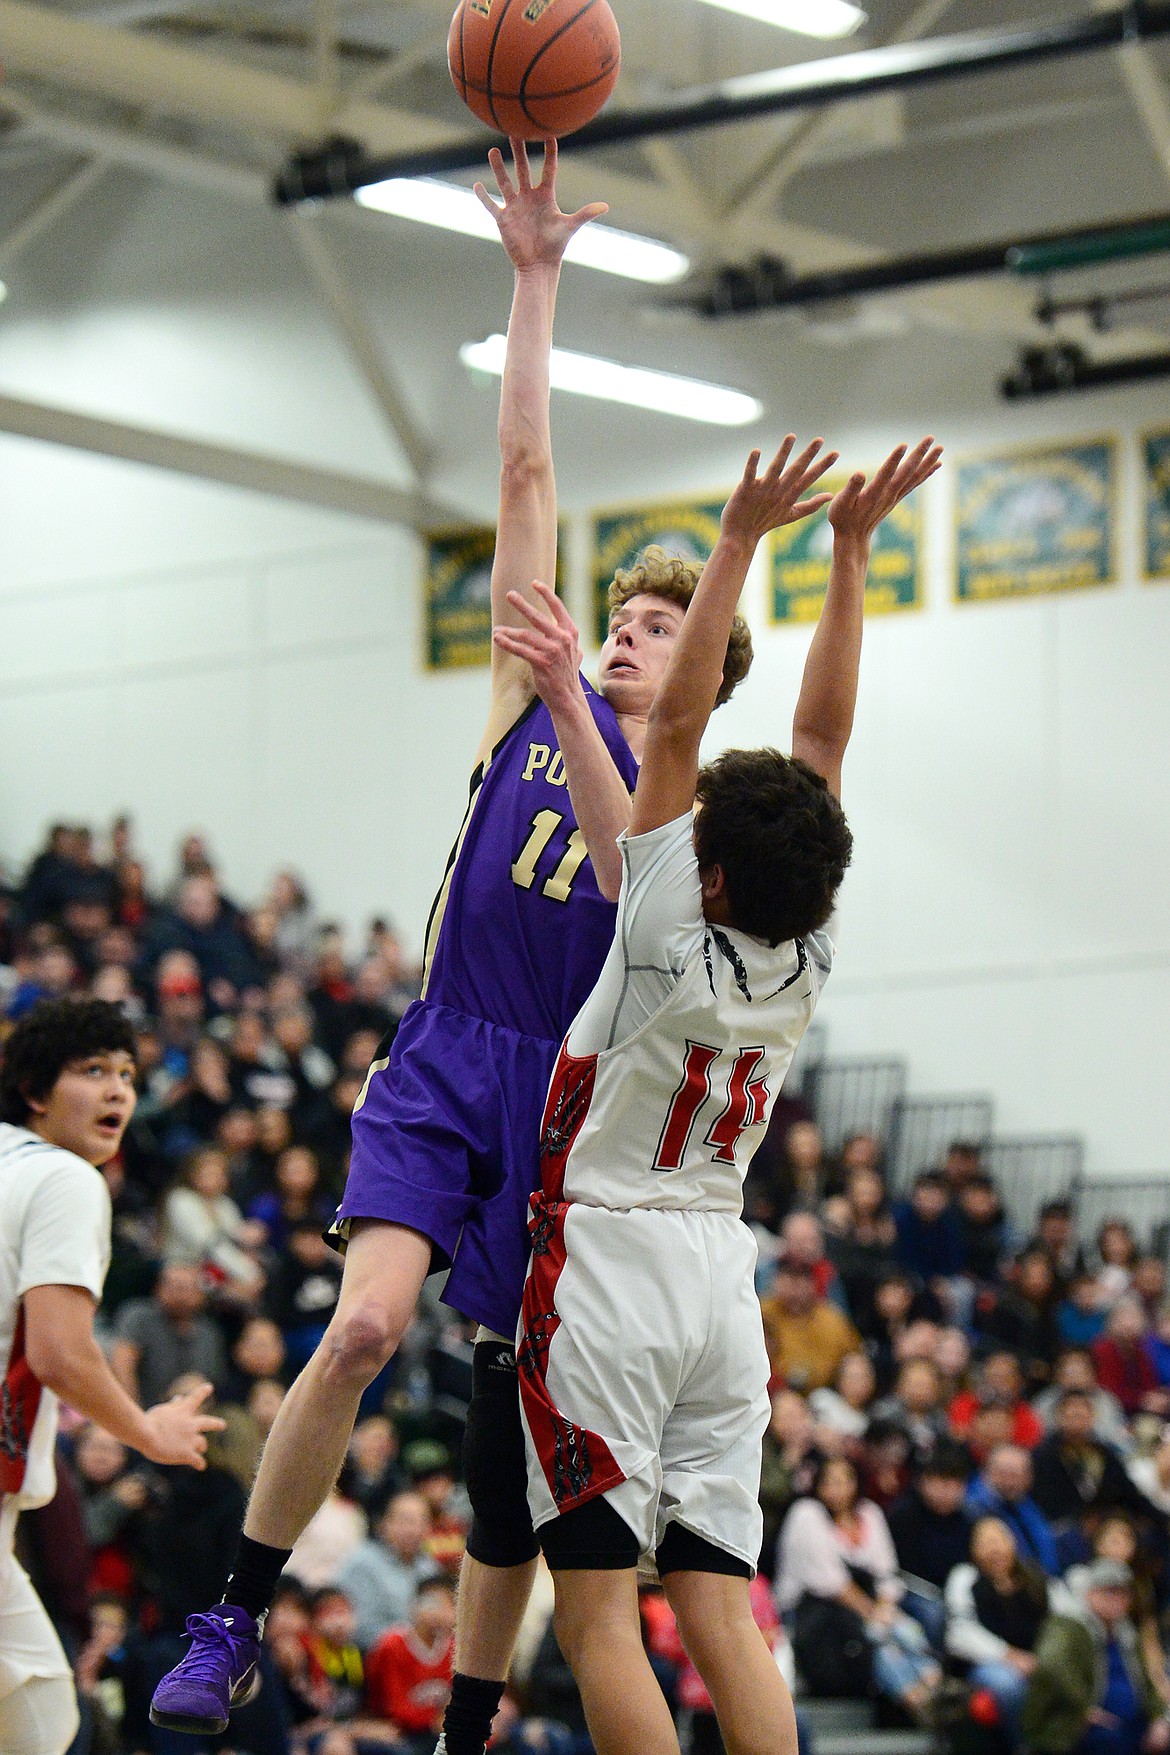 Polson's Robin Erickson (11) releases a shot in the lane over Browning's Derek Sharp (14) during the Northwest A District boys' championship game at Whitefish High School on Saturday. Browning won, 78-50. (Casey Kreider/Daily Inter Lake)